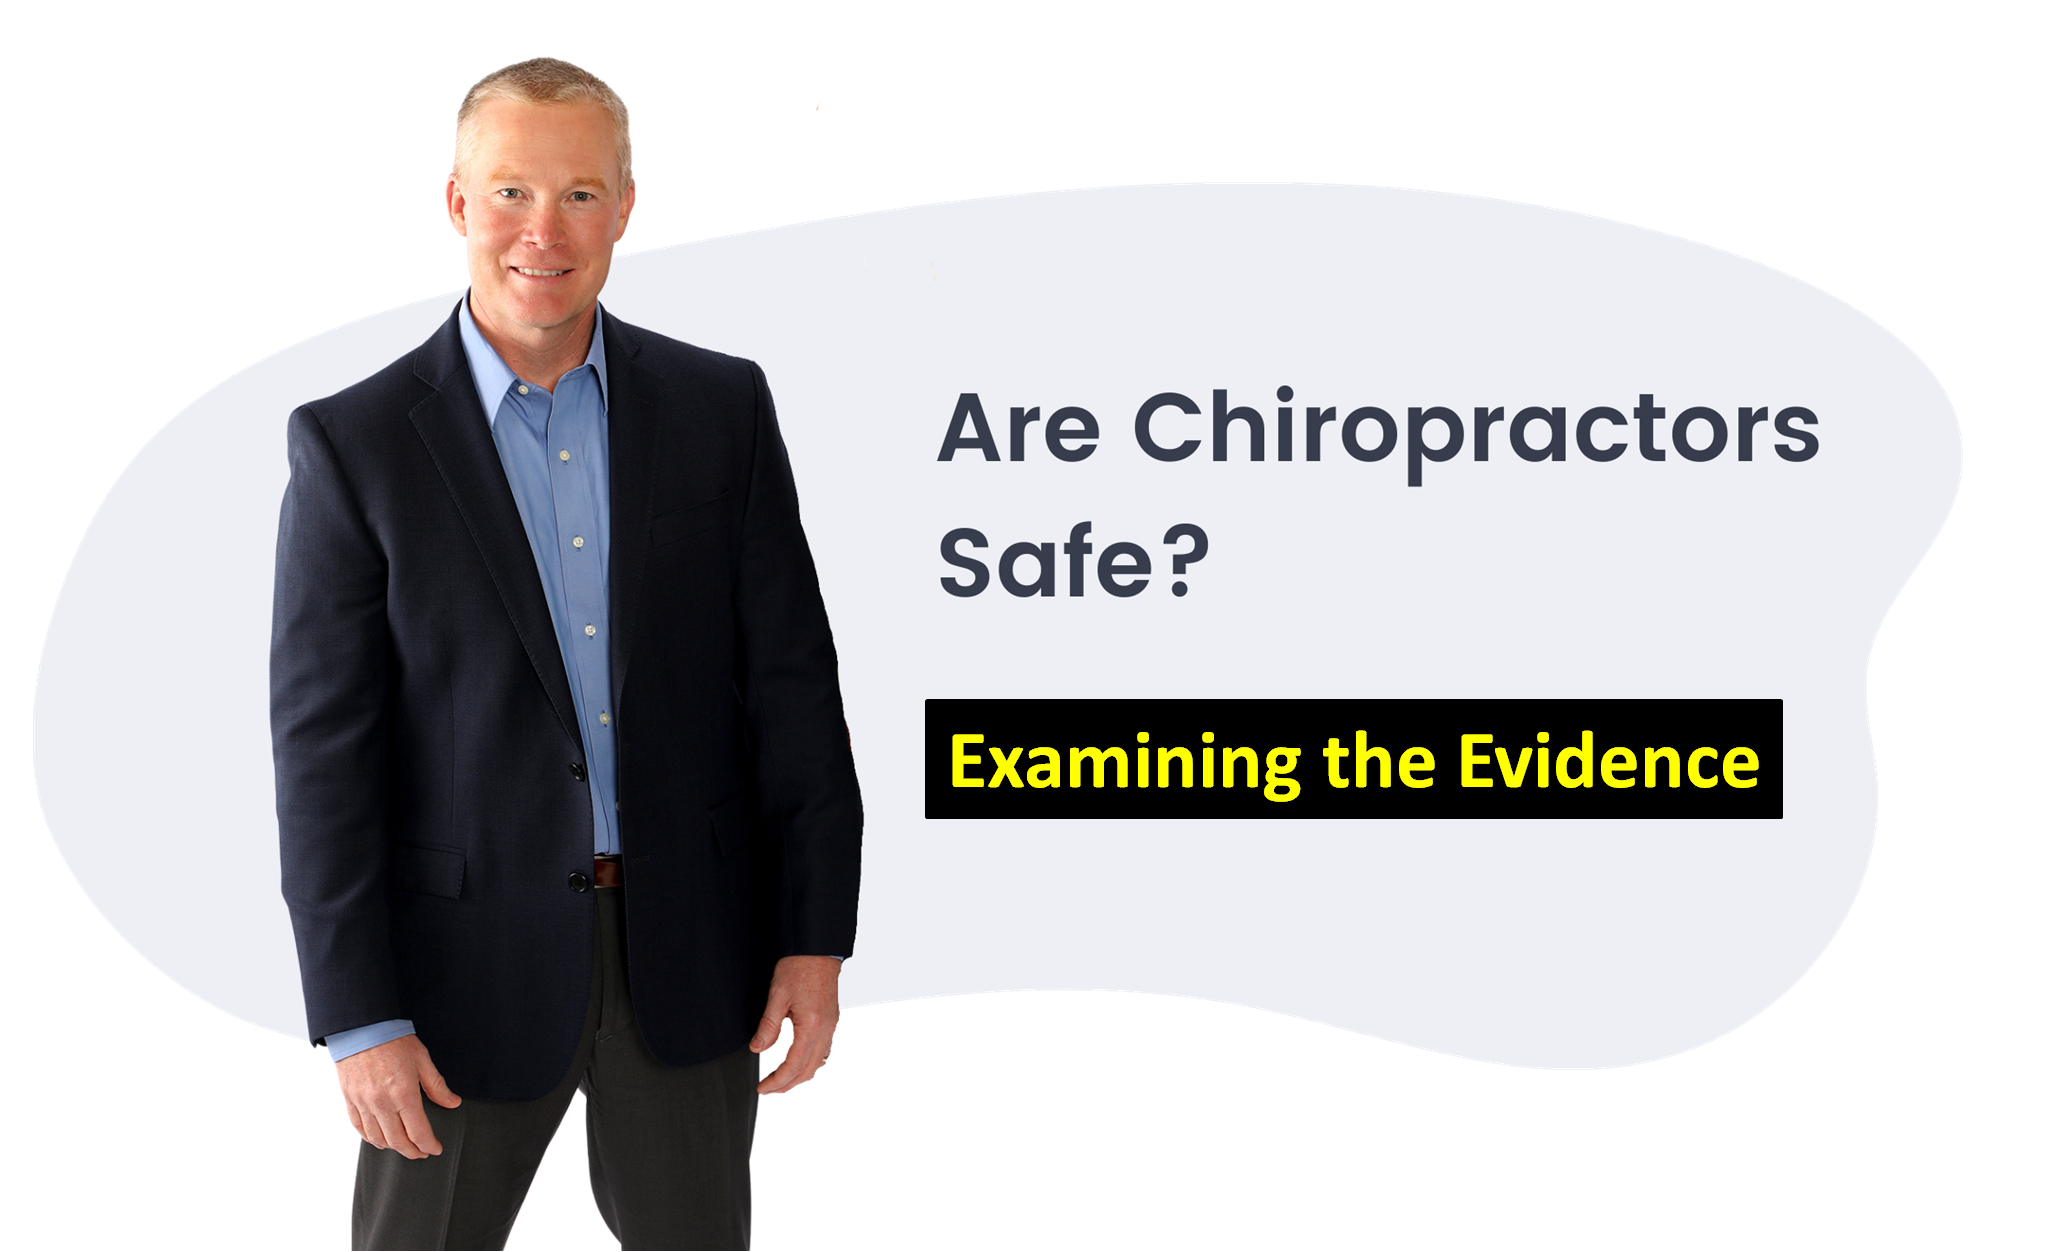 Are Chiropractors Safe?